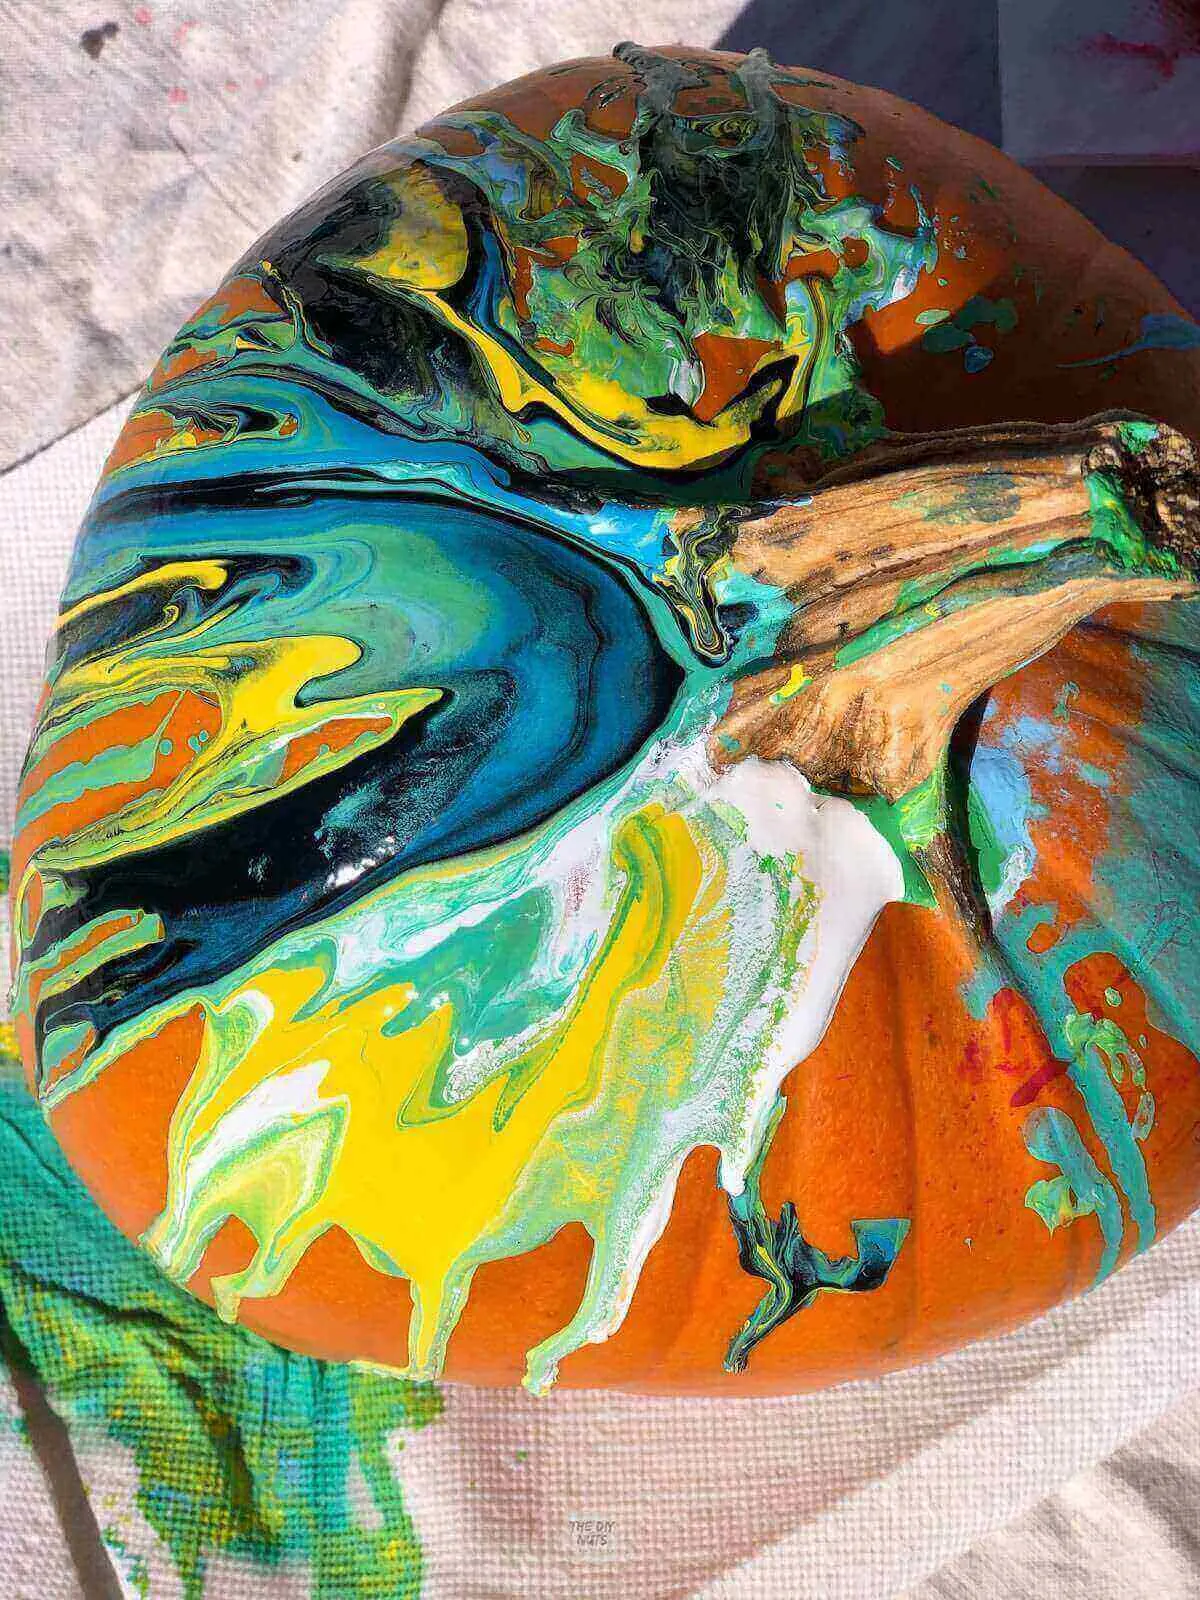 Top view of a pumpkin with paint pour technique used to decorate.